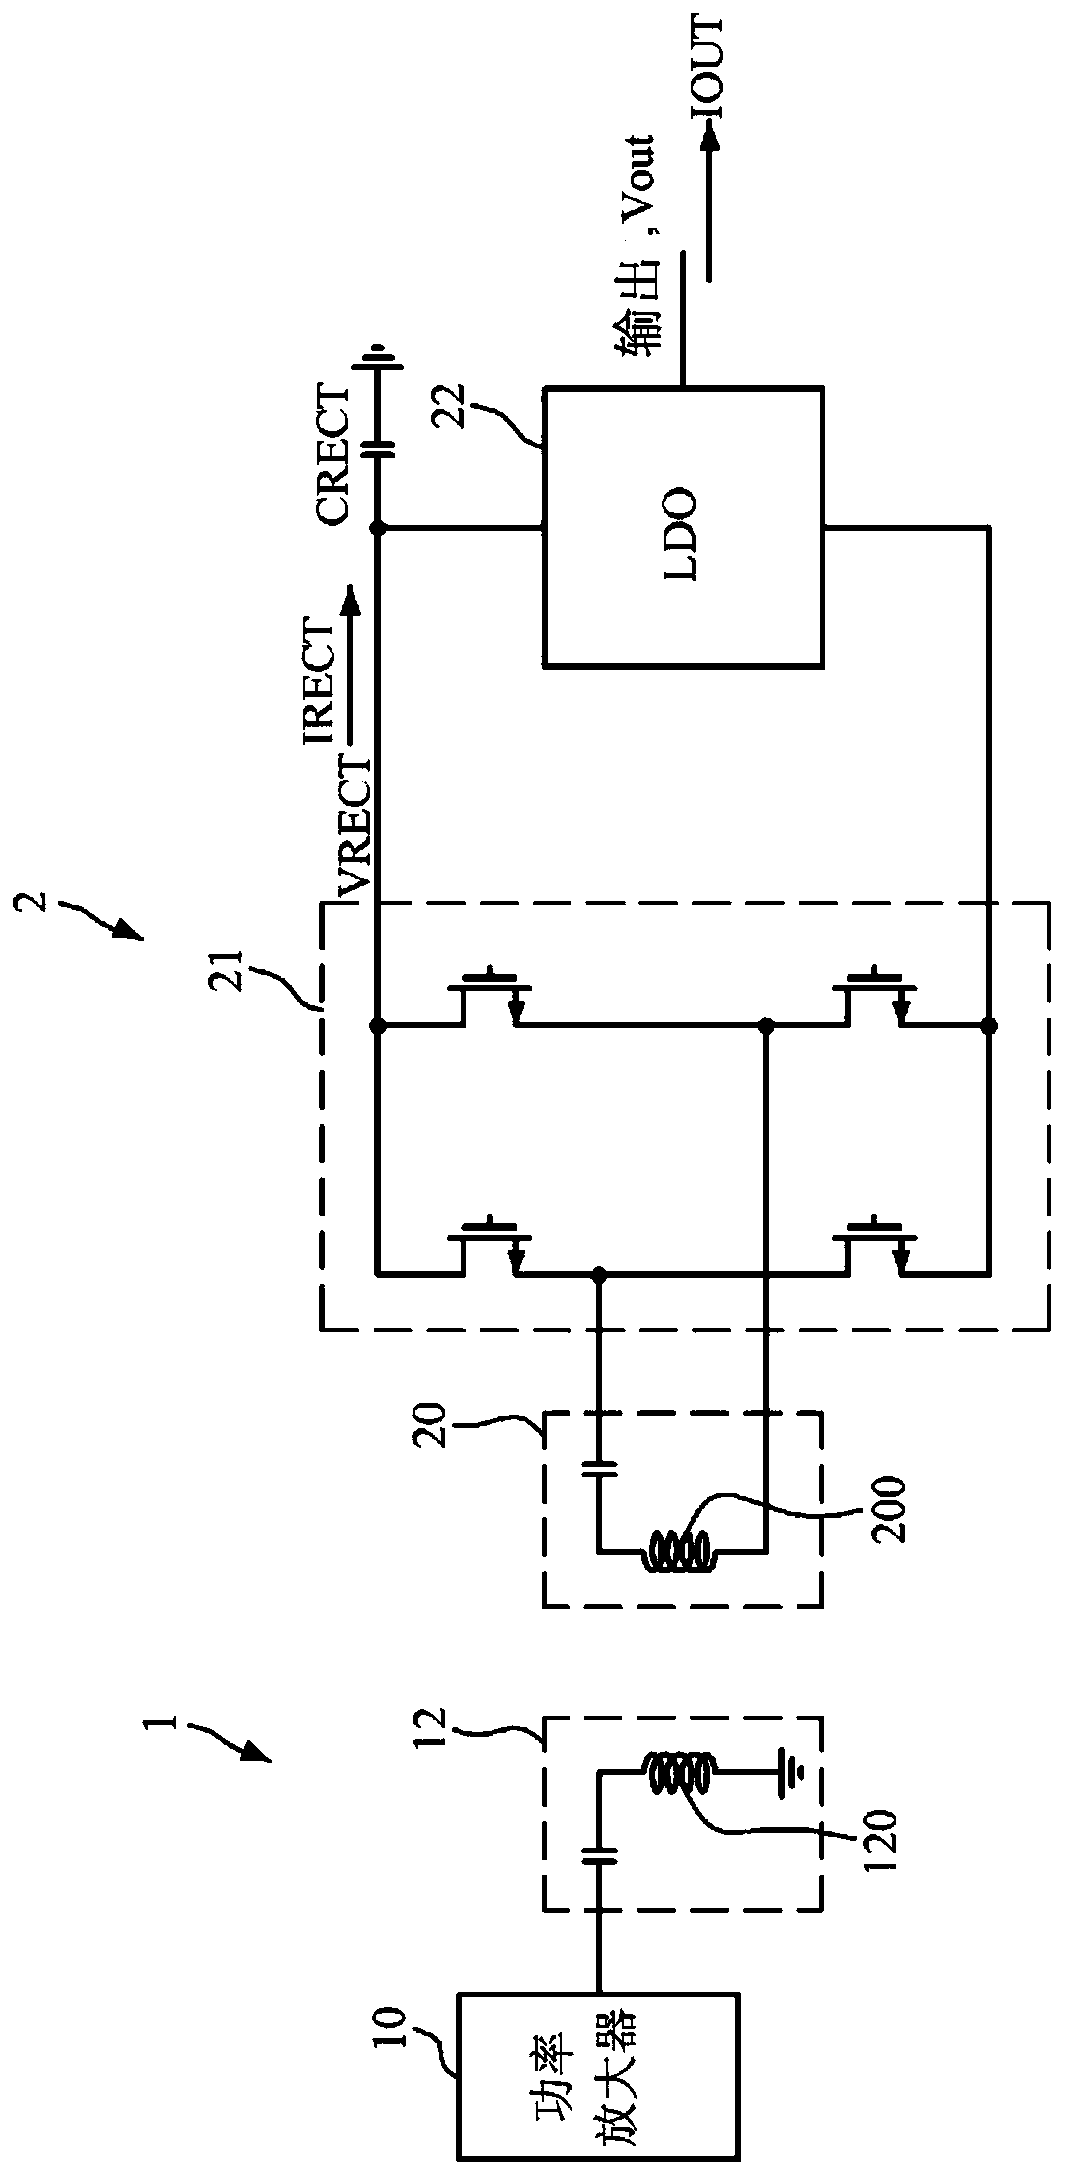 Charge pump-based wireless power receiver